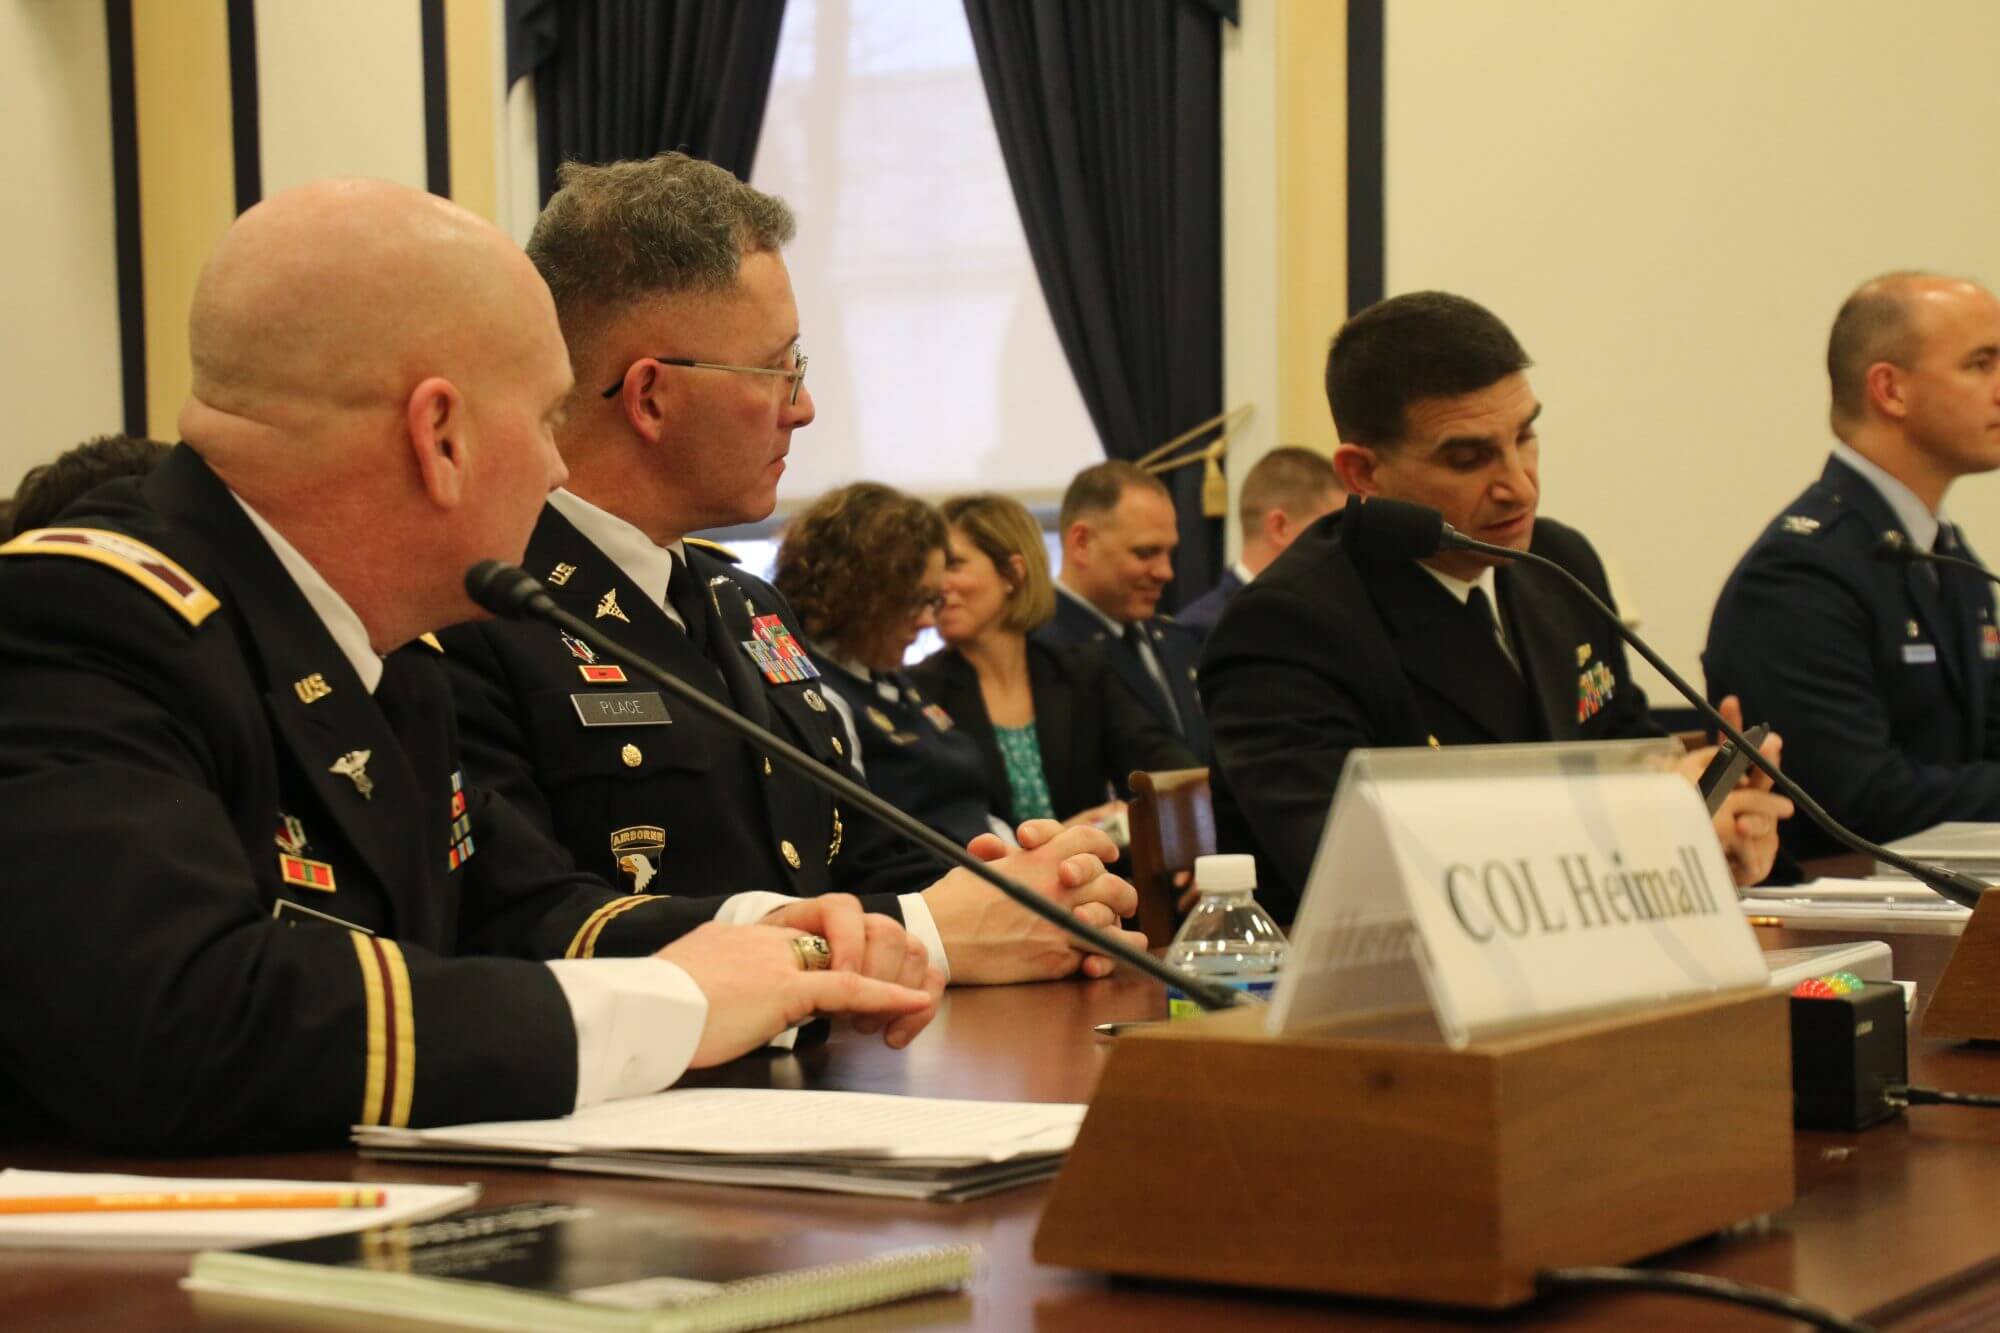 Armed Services panel: Military care about more than medical readiness